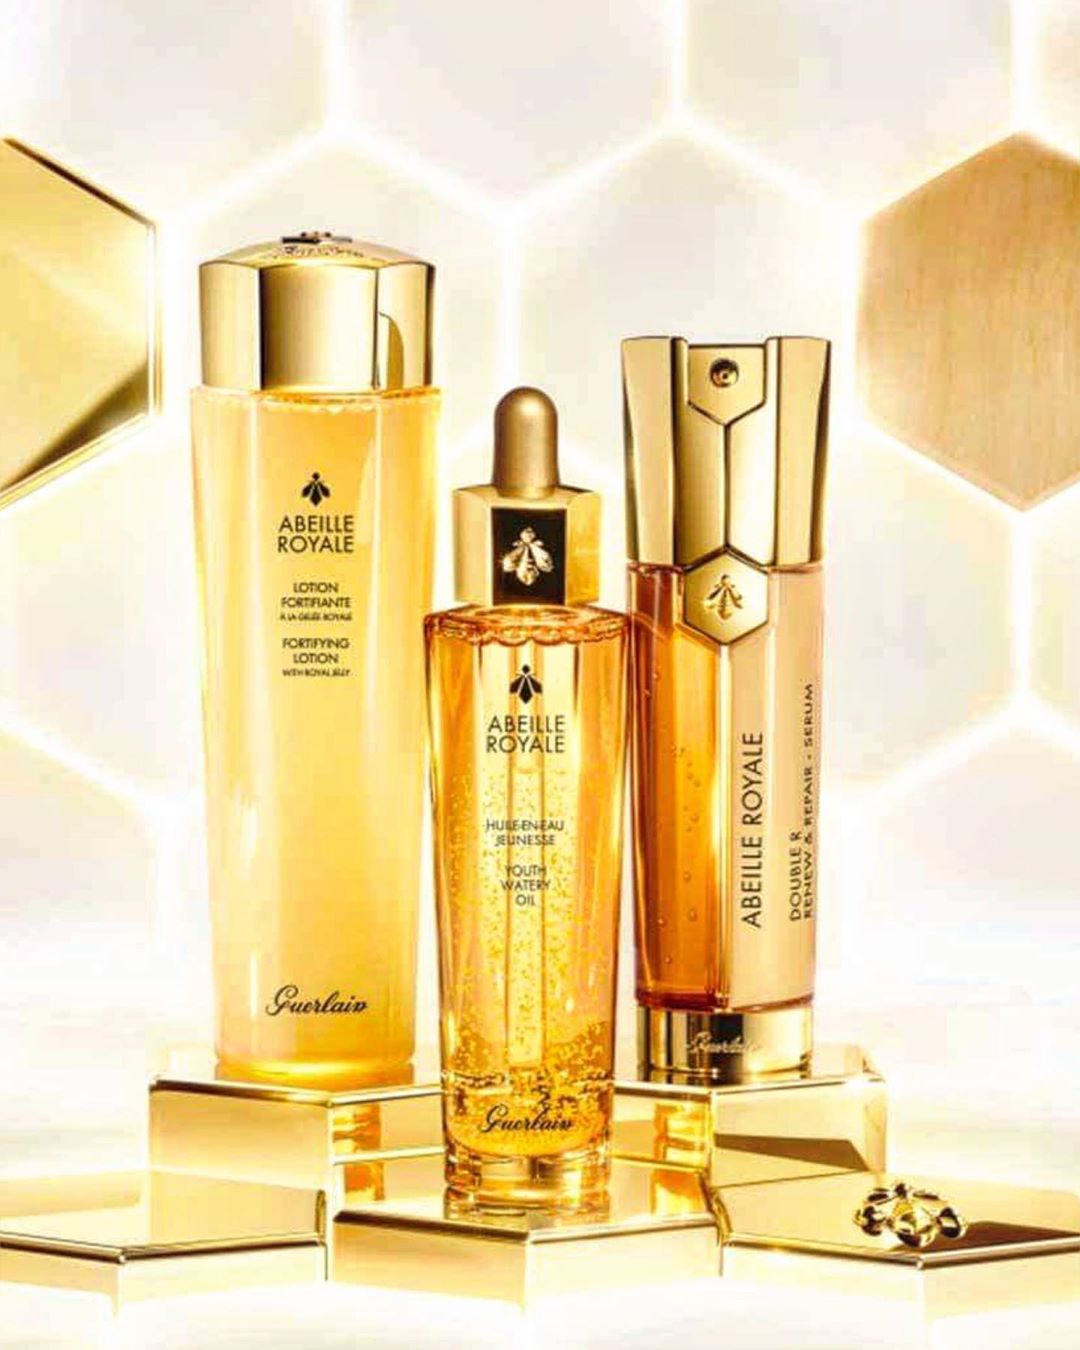 Guerlain - Discover the power of Abeille Royale's Golden Skincare Trio.

When used together, skin radiates a youthful glow, as though boosted from within.*

First, the Fortifying Lotion leaves skin hy...